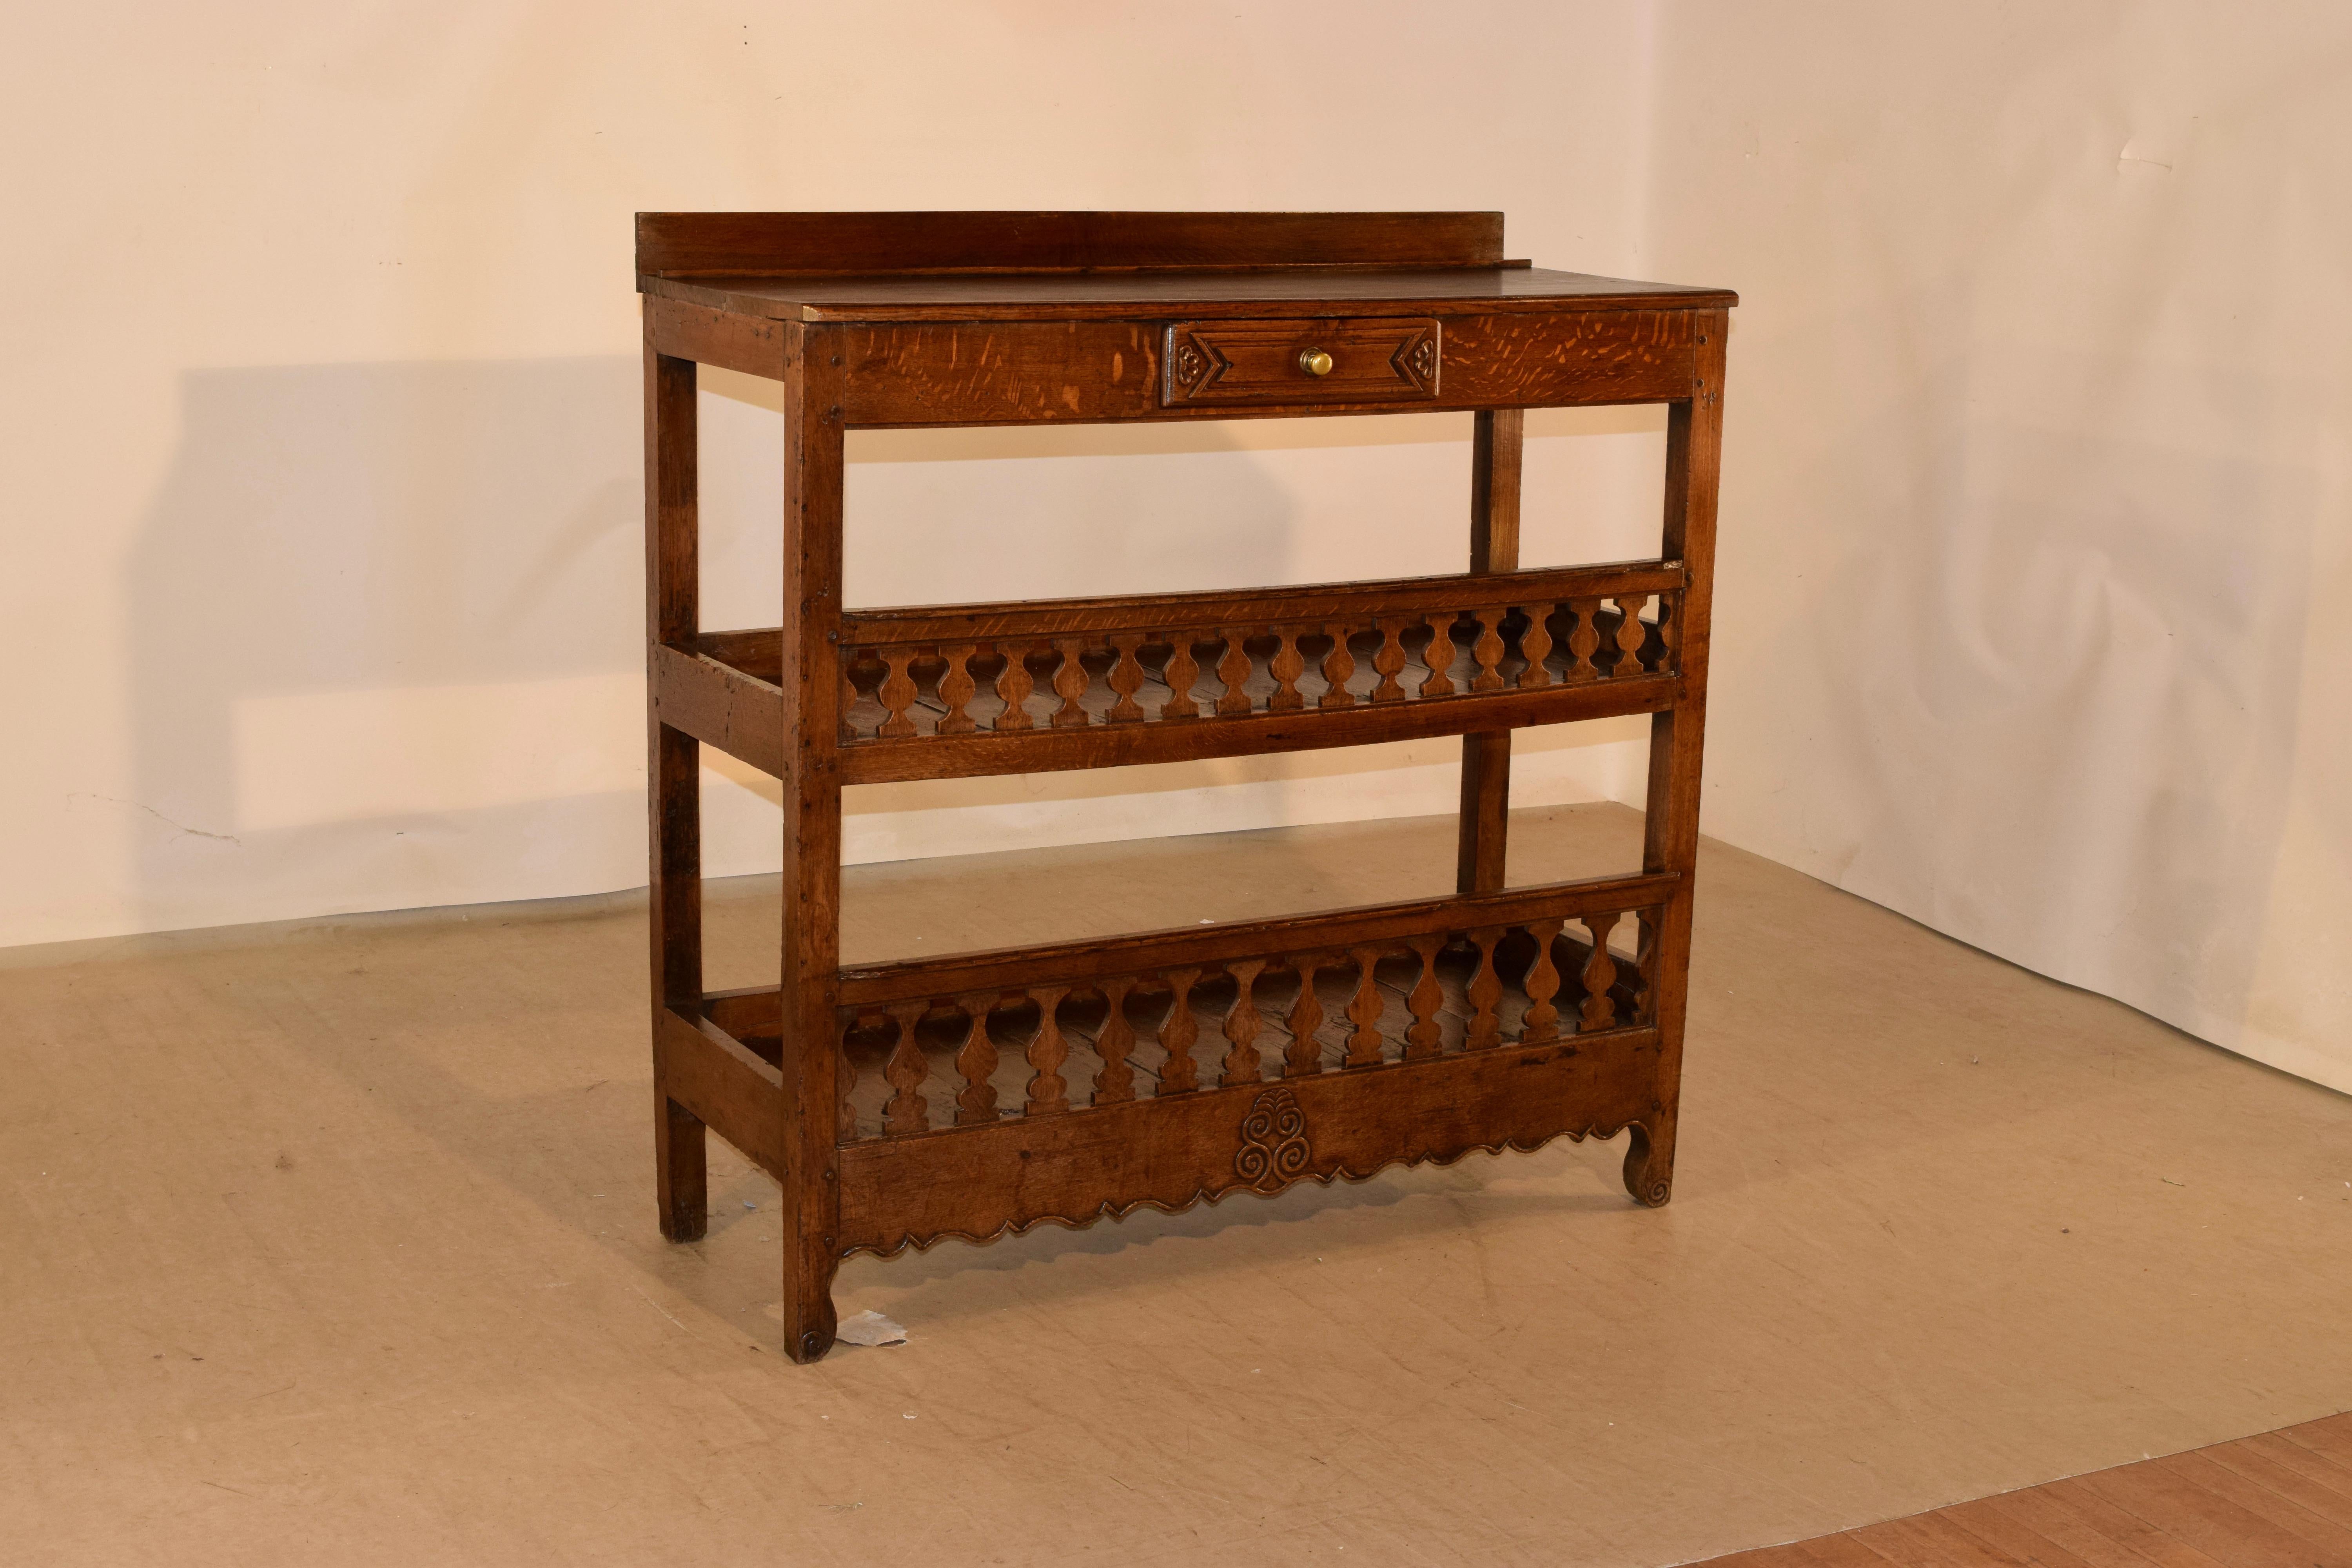 19th century oak baker's rack from France. This is a lovely form with a small backsplash following down to a simple apron which contains a single drawer. There are two shelves with galleries around each side and lovely hand carved baluster-type